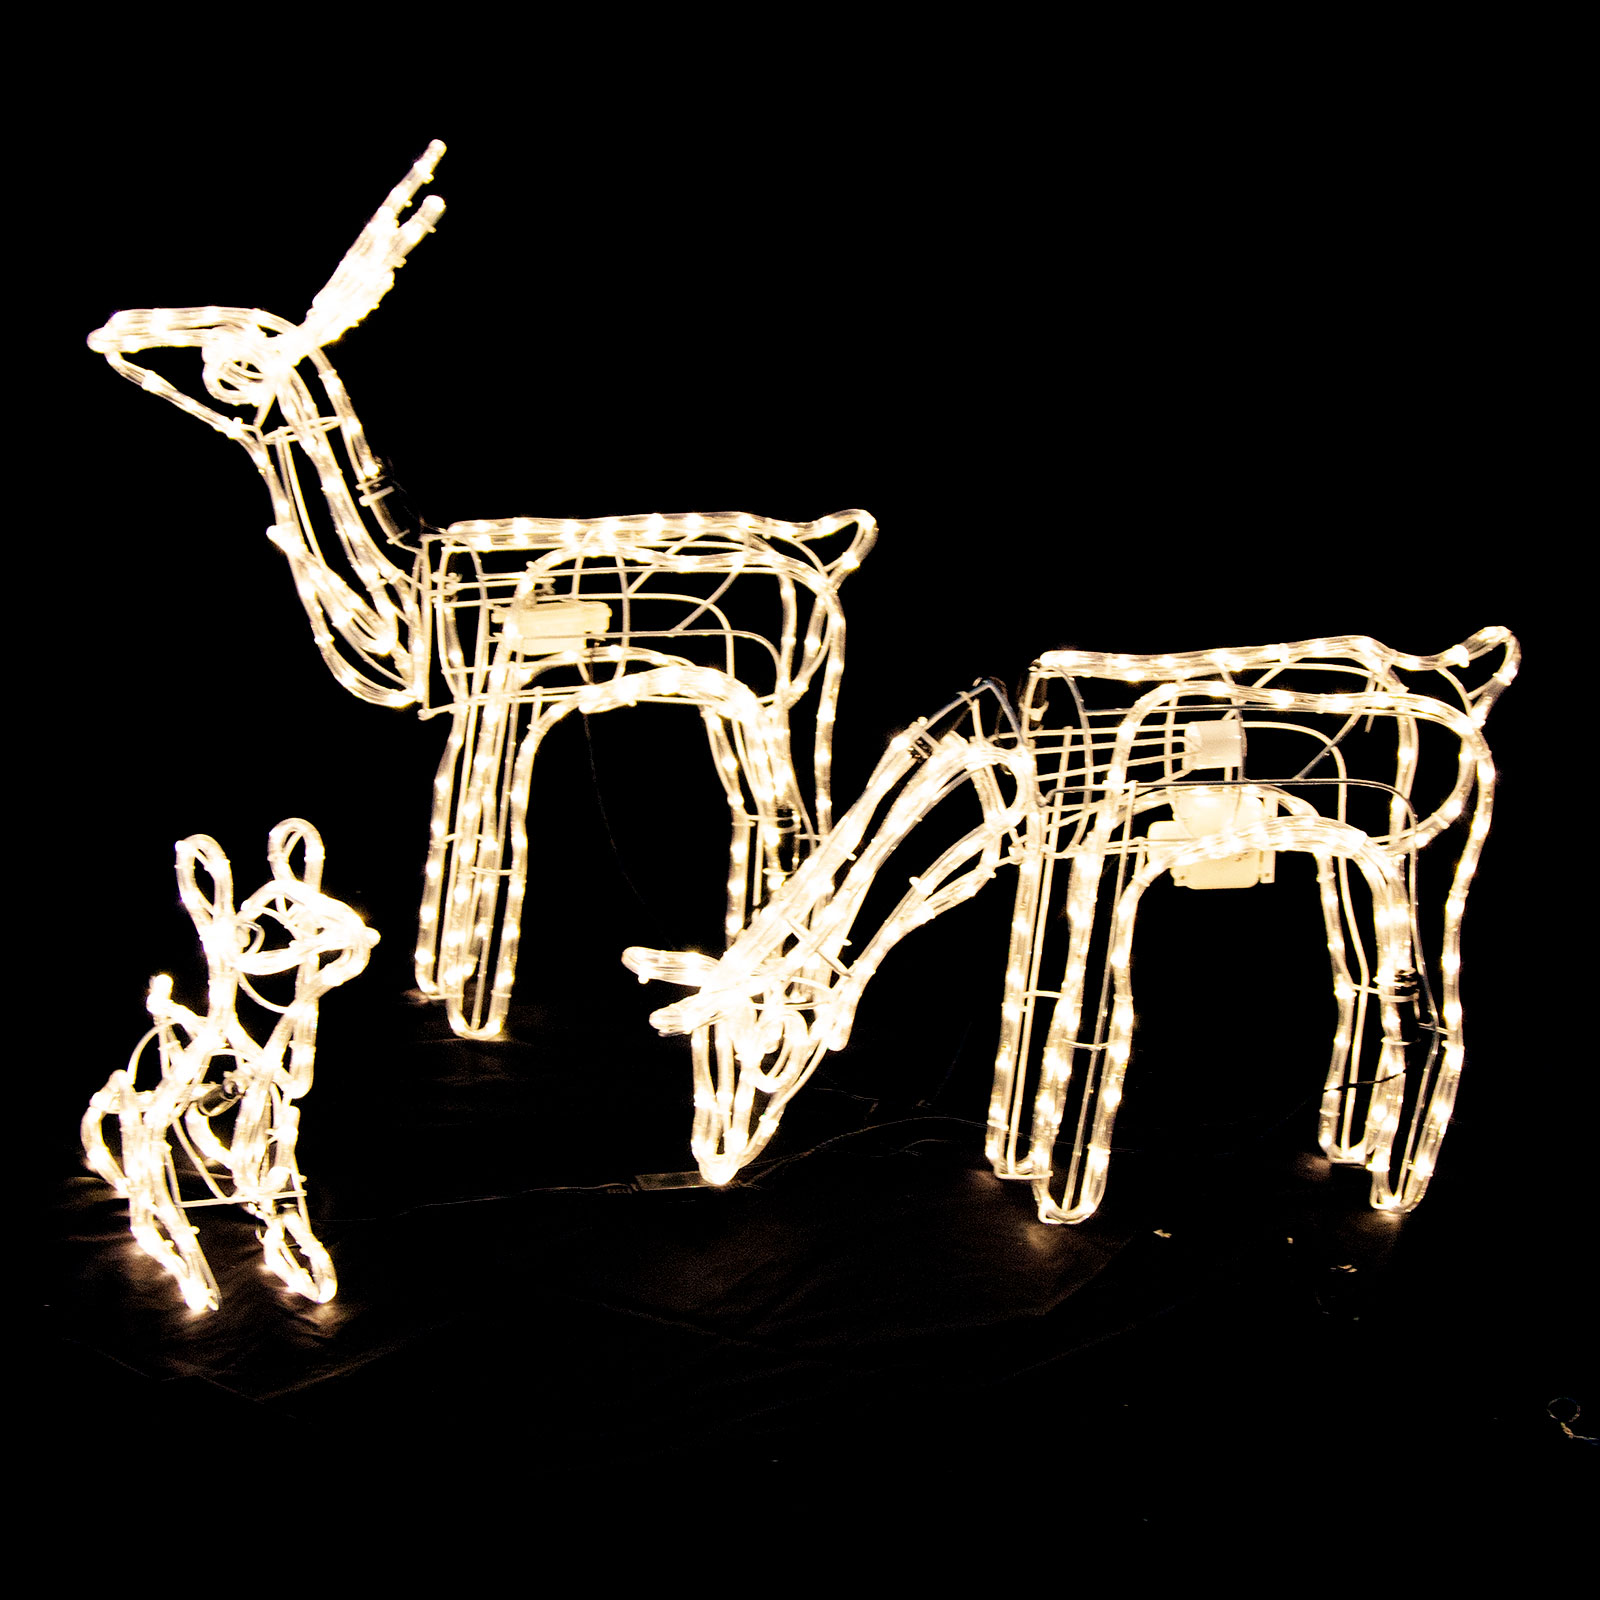 Set of 3 Moving Head Reindeer Family Rope Light for Christmas Yard